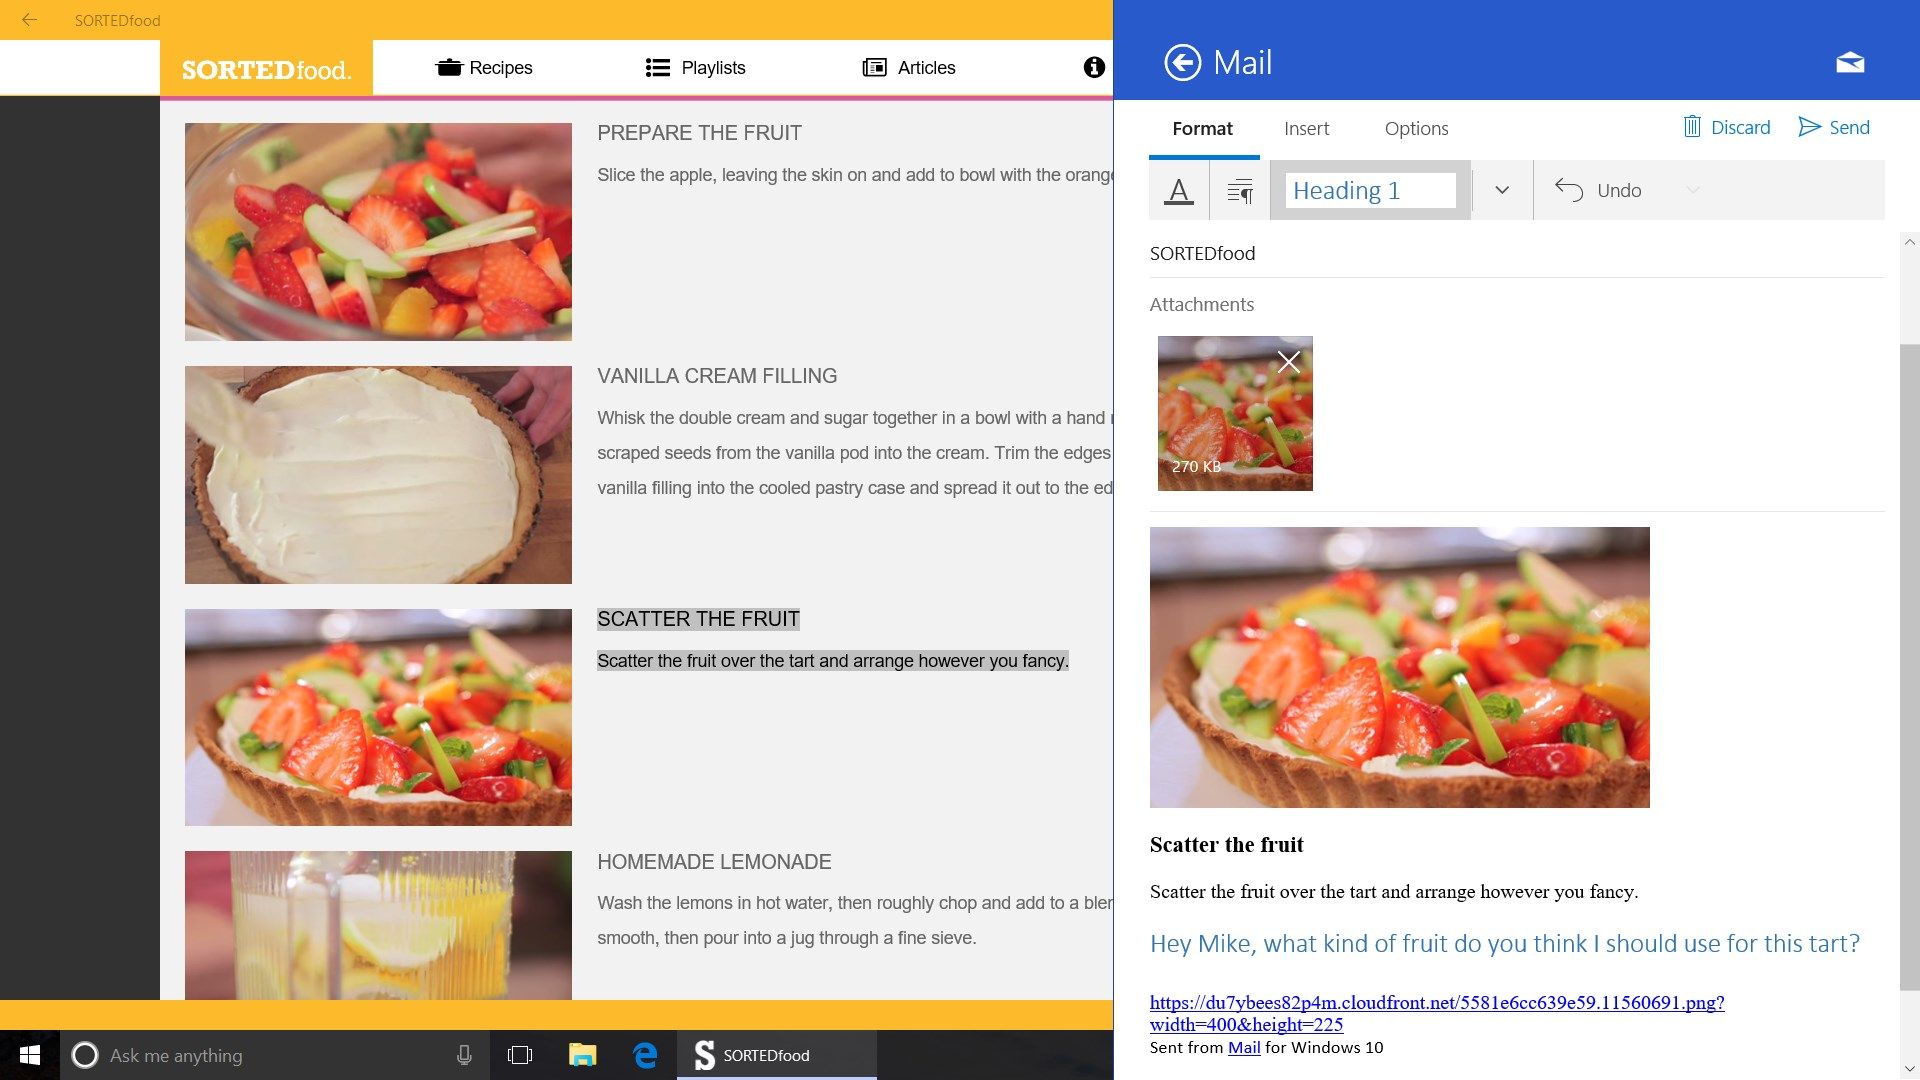 Easily share recipes and articles with your friends using other Windows apps like Outlook Mail and OneNote. You can select specific images and text to share too.